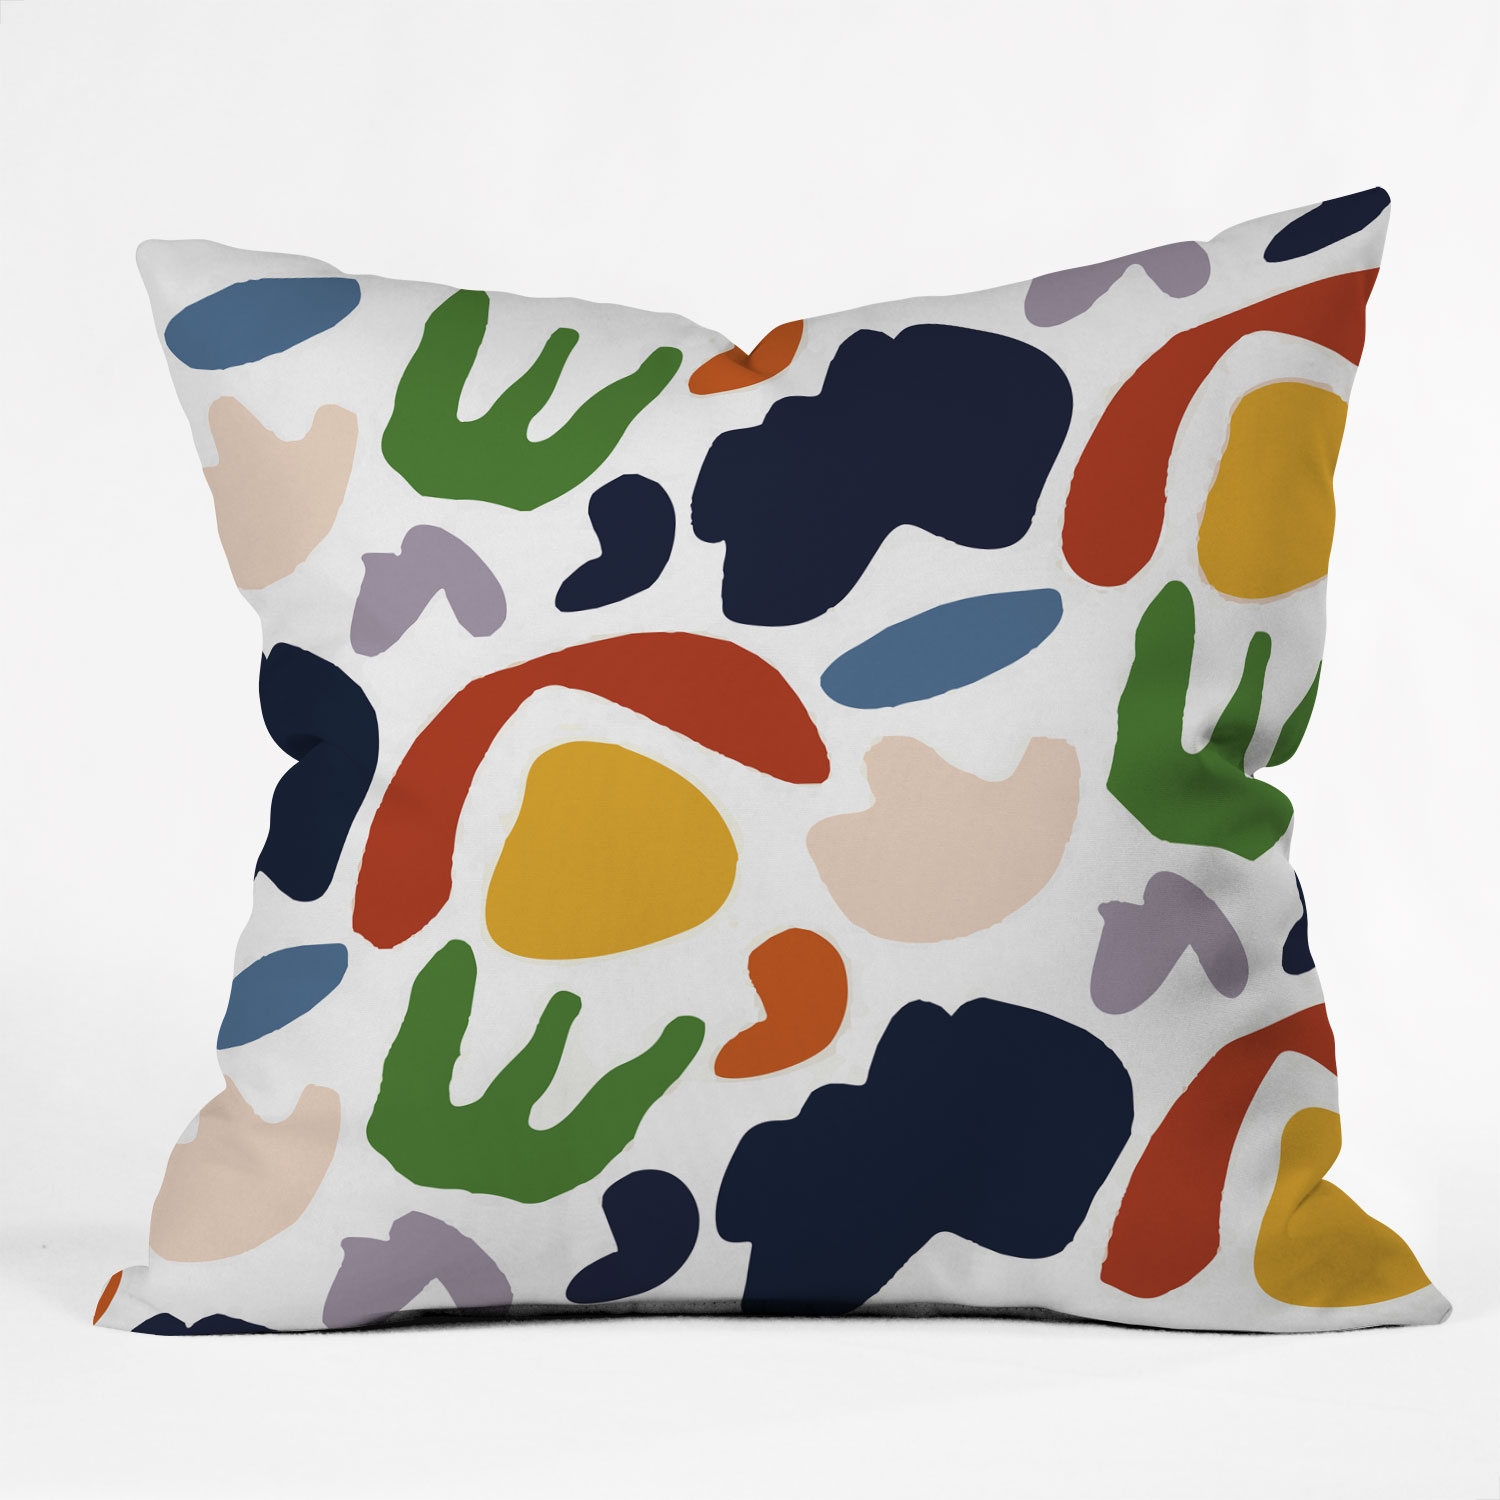 Cut Out Shapes Vibrant by Mambo Art Studio - Outdoor Throw Pillow 18" x 18" - Image 1